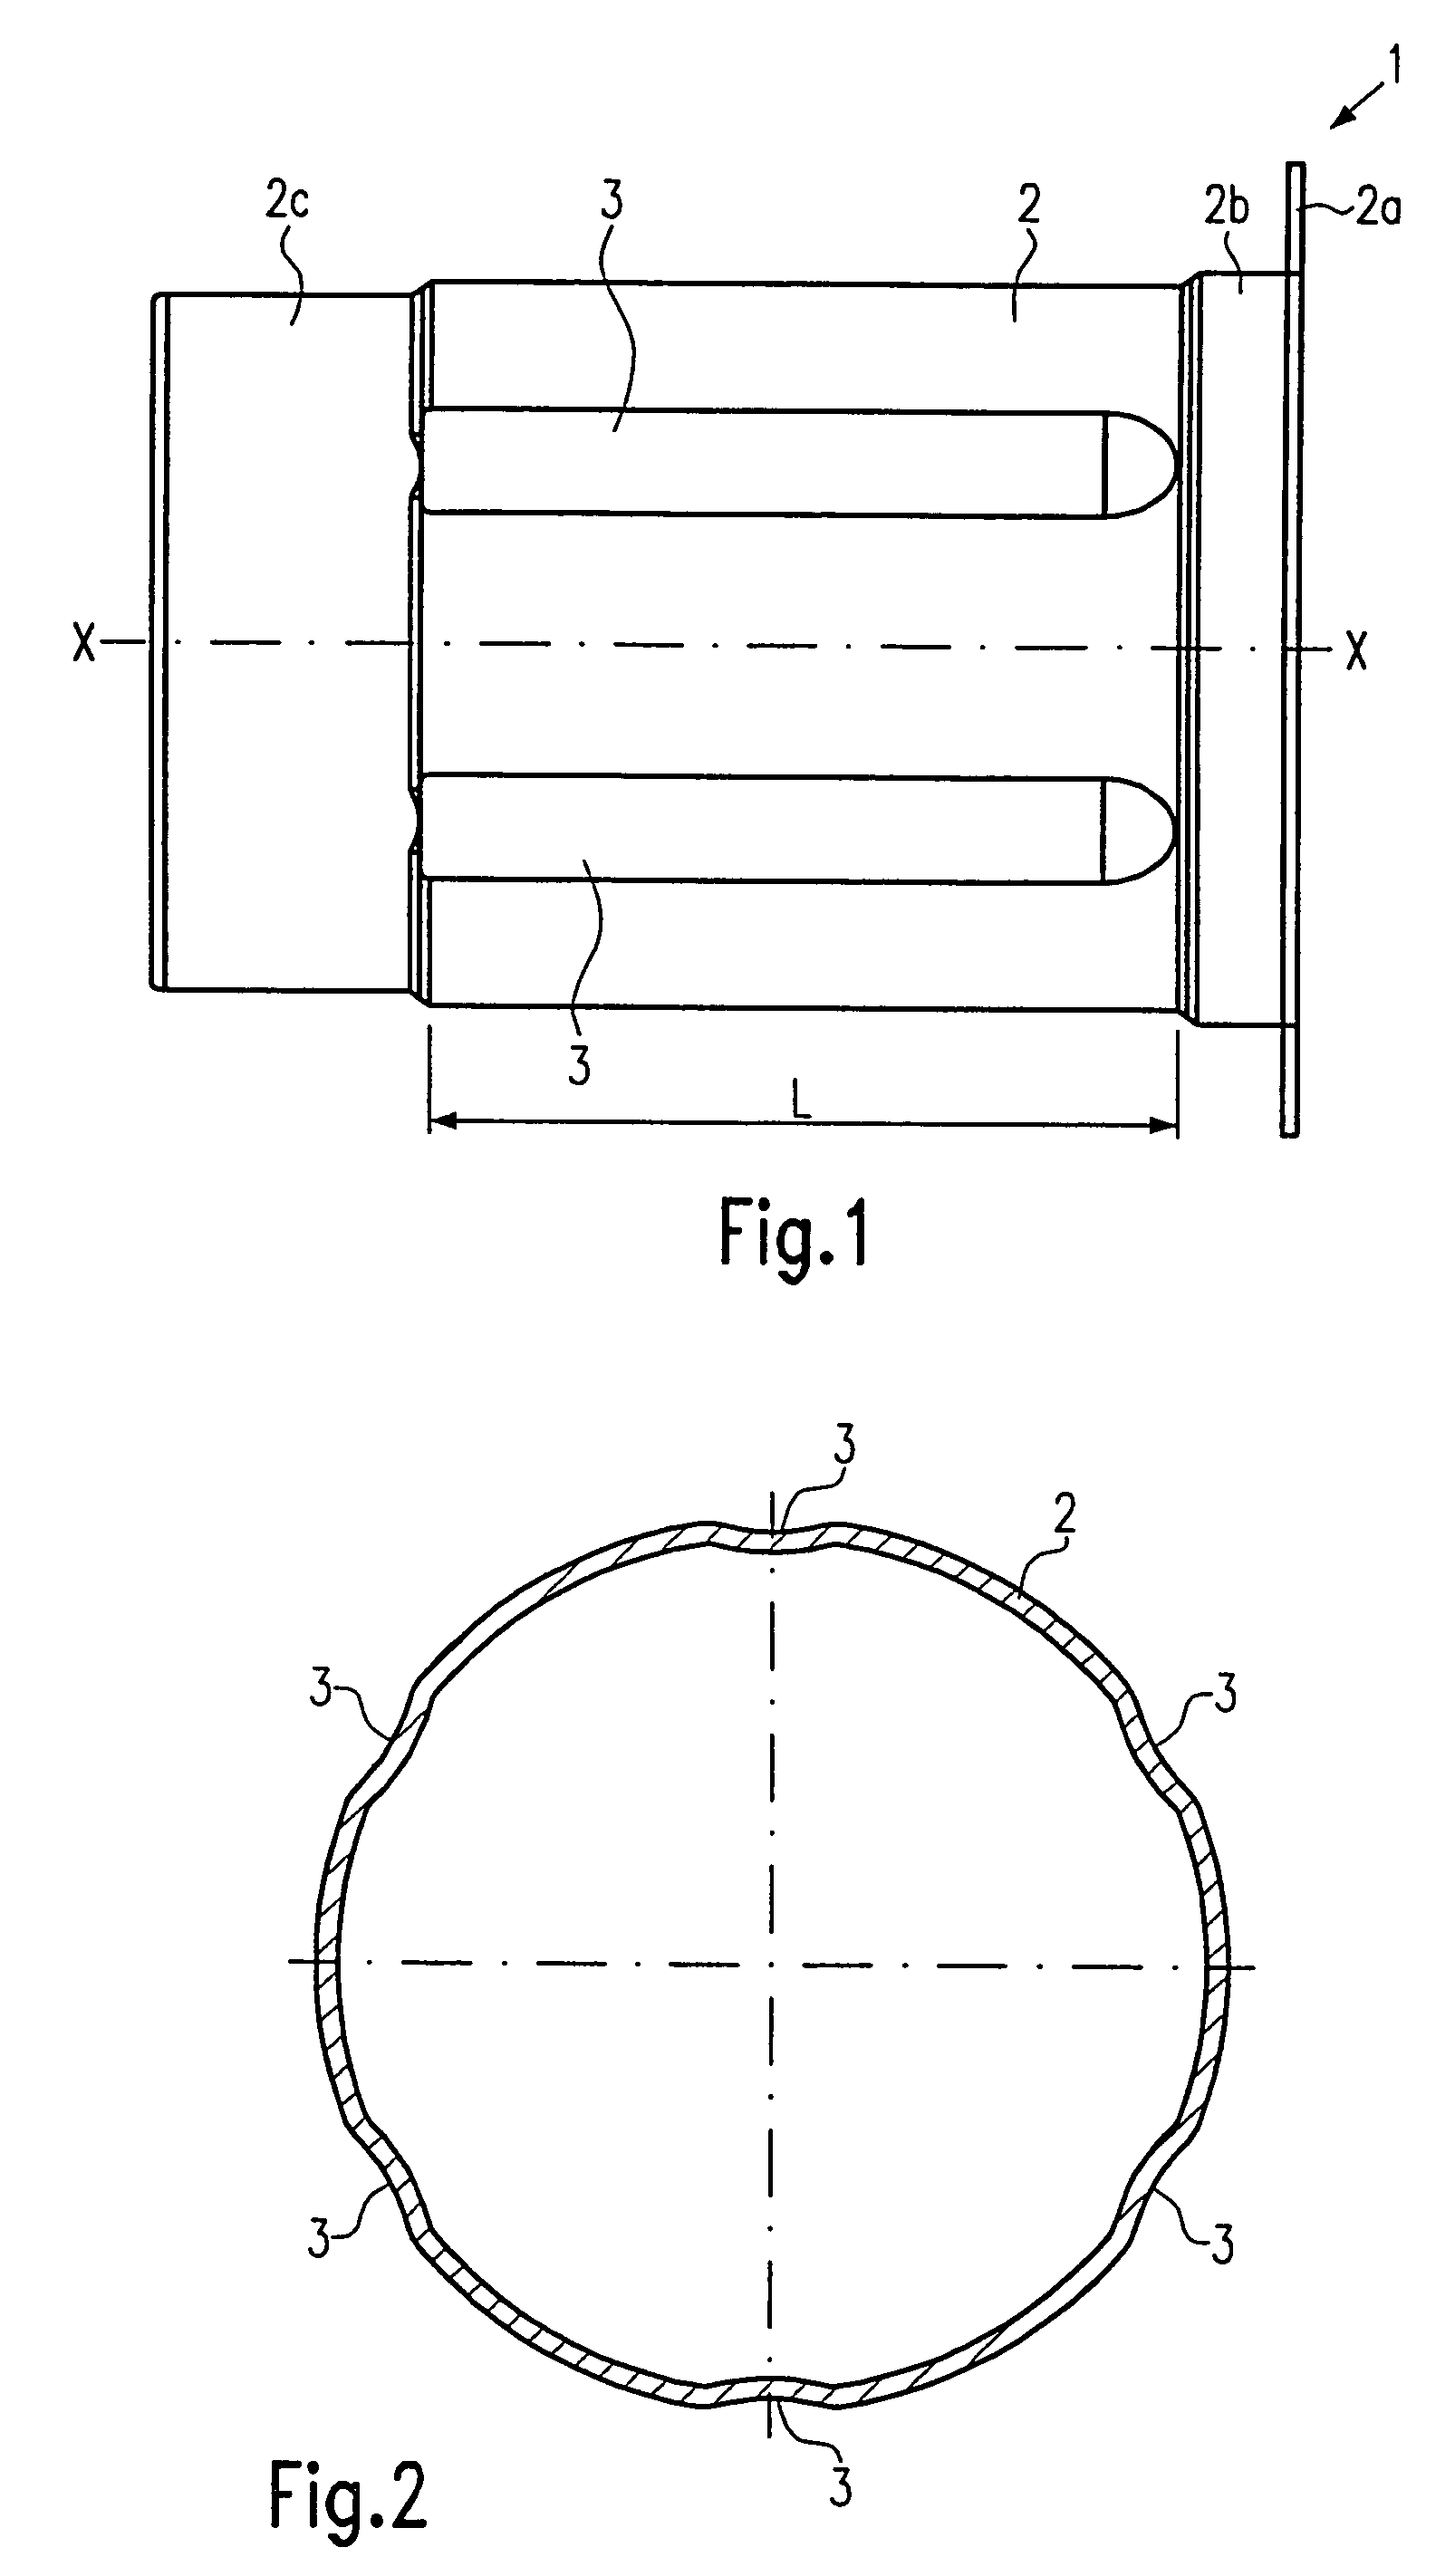 Stator assembly for an electrical machine